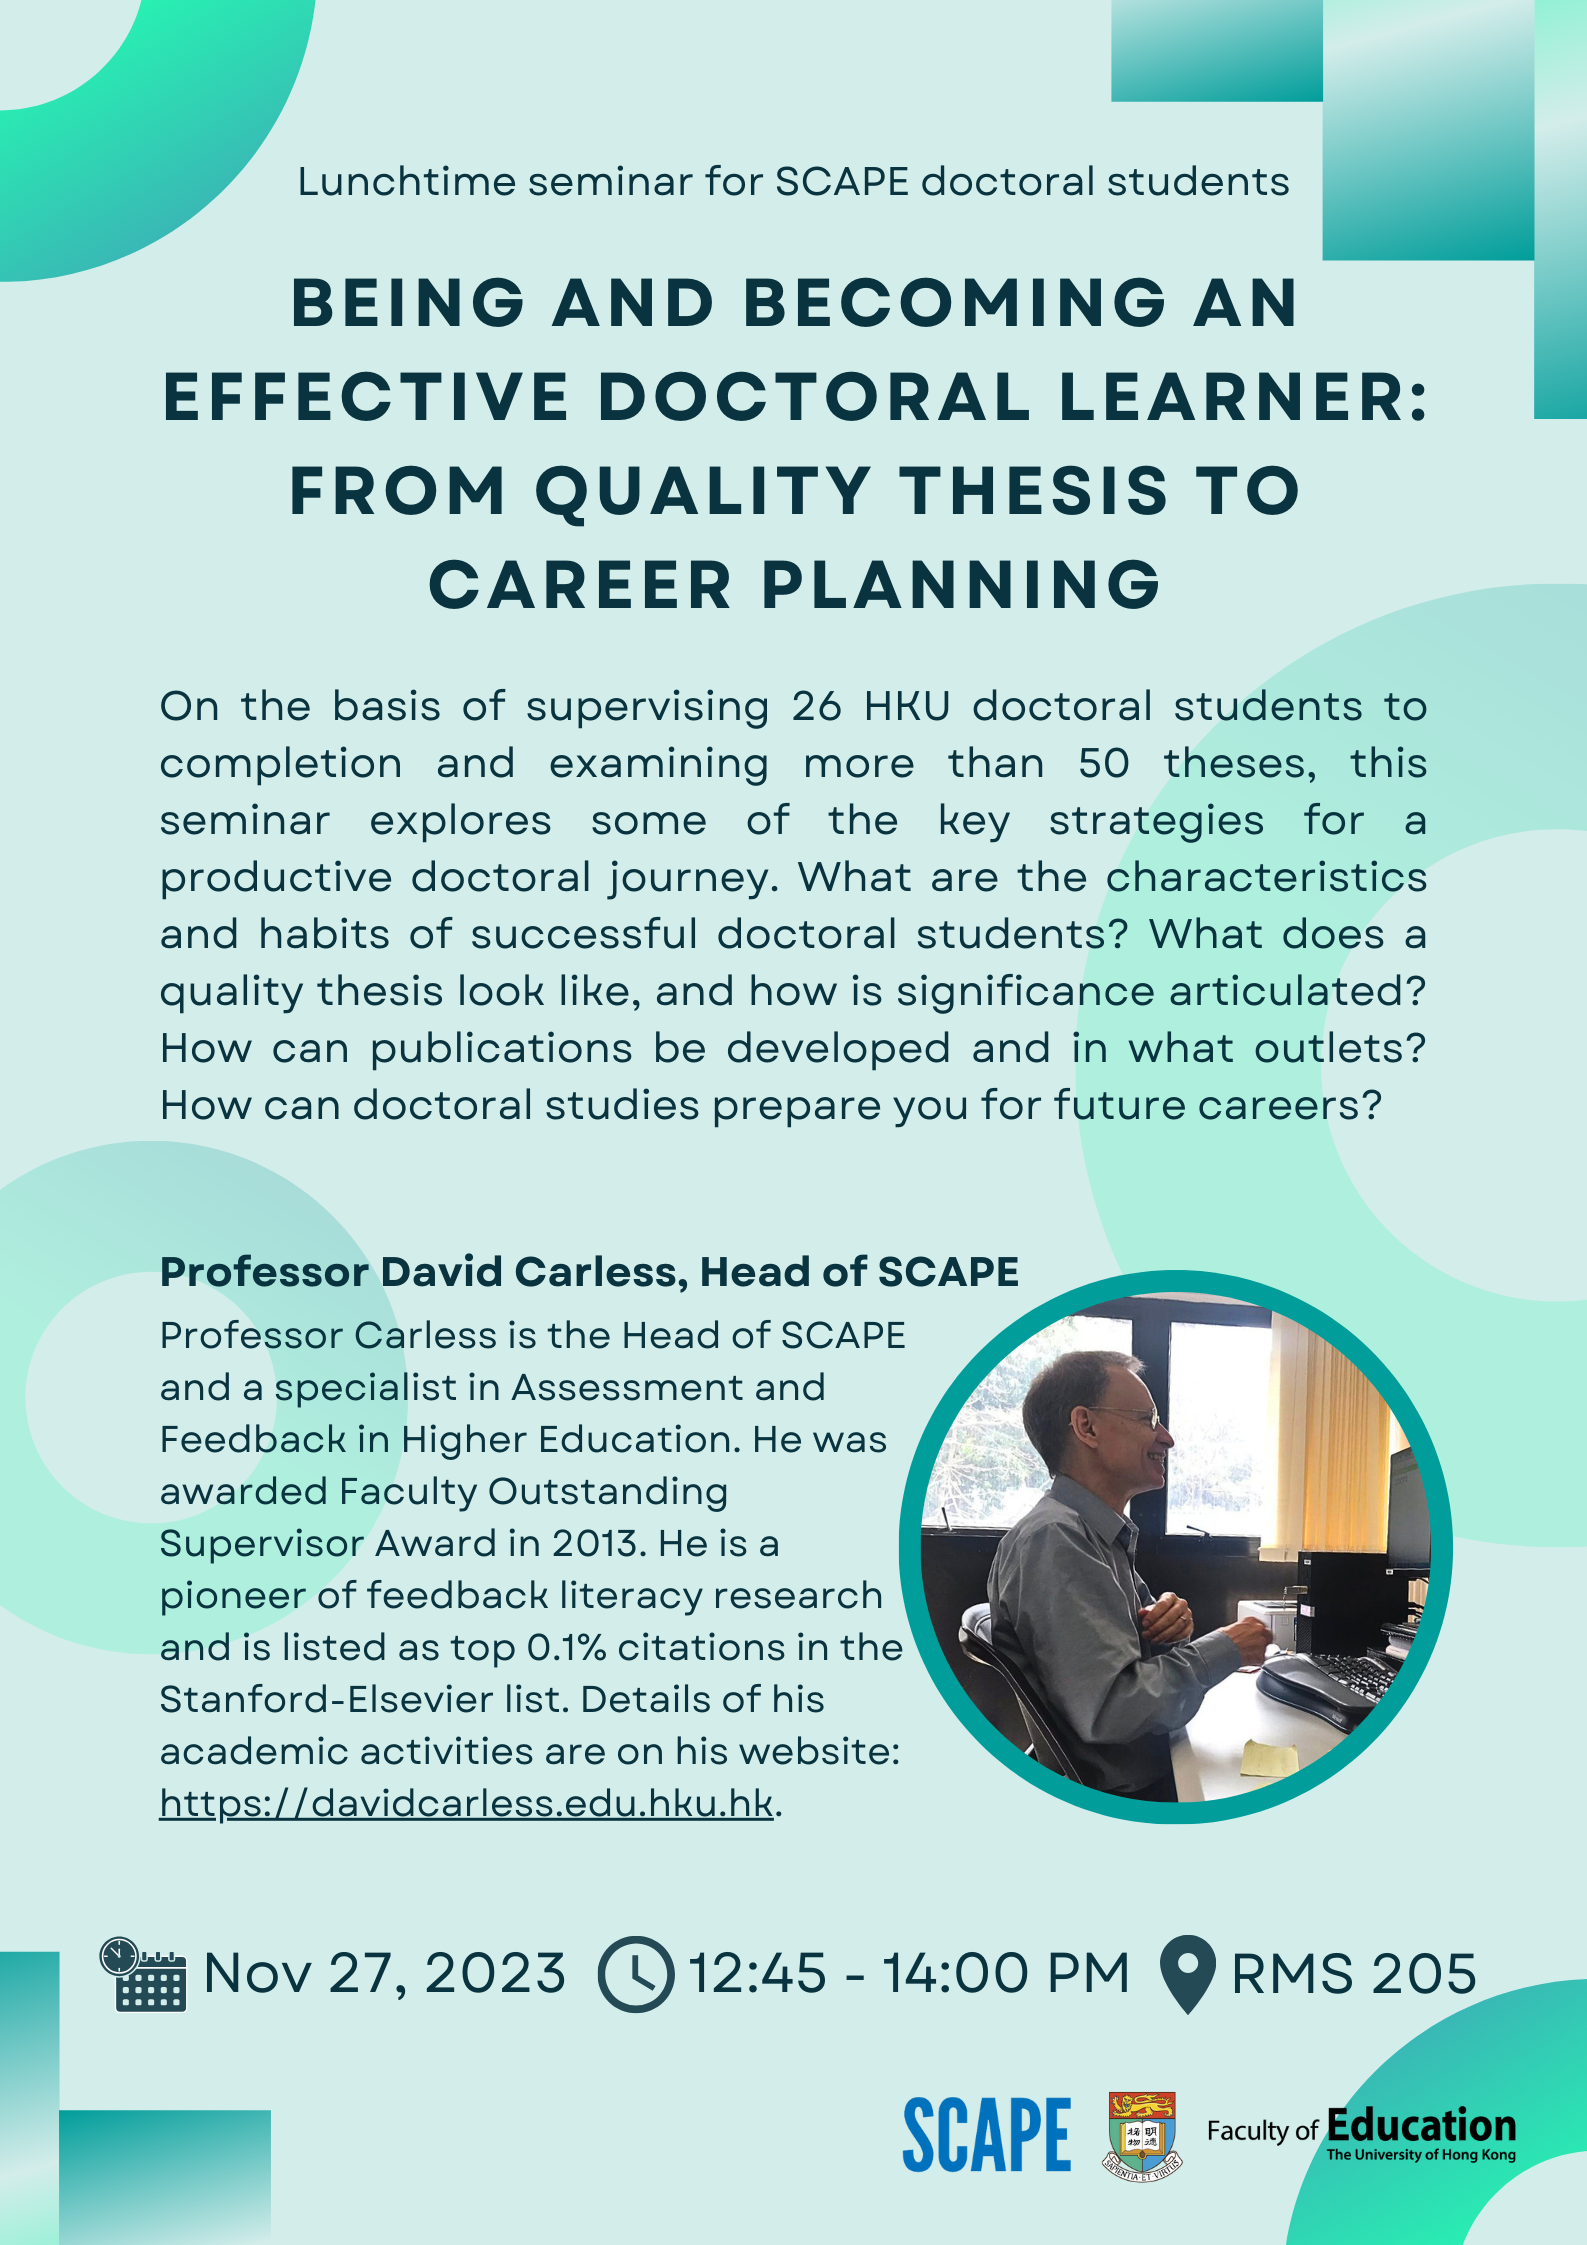 [Full Video Available] Being and Becoming an Effective Doctoral Learner: From Quality Thesis to Career Planning